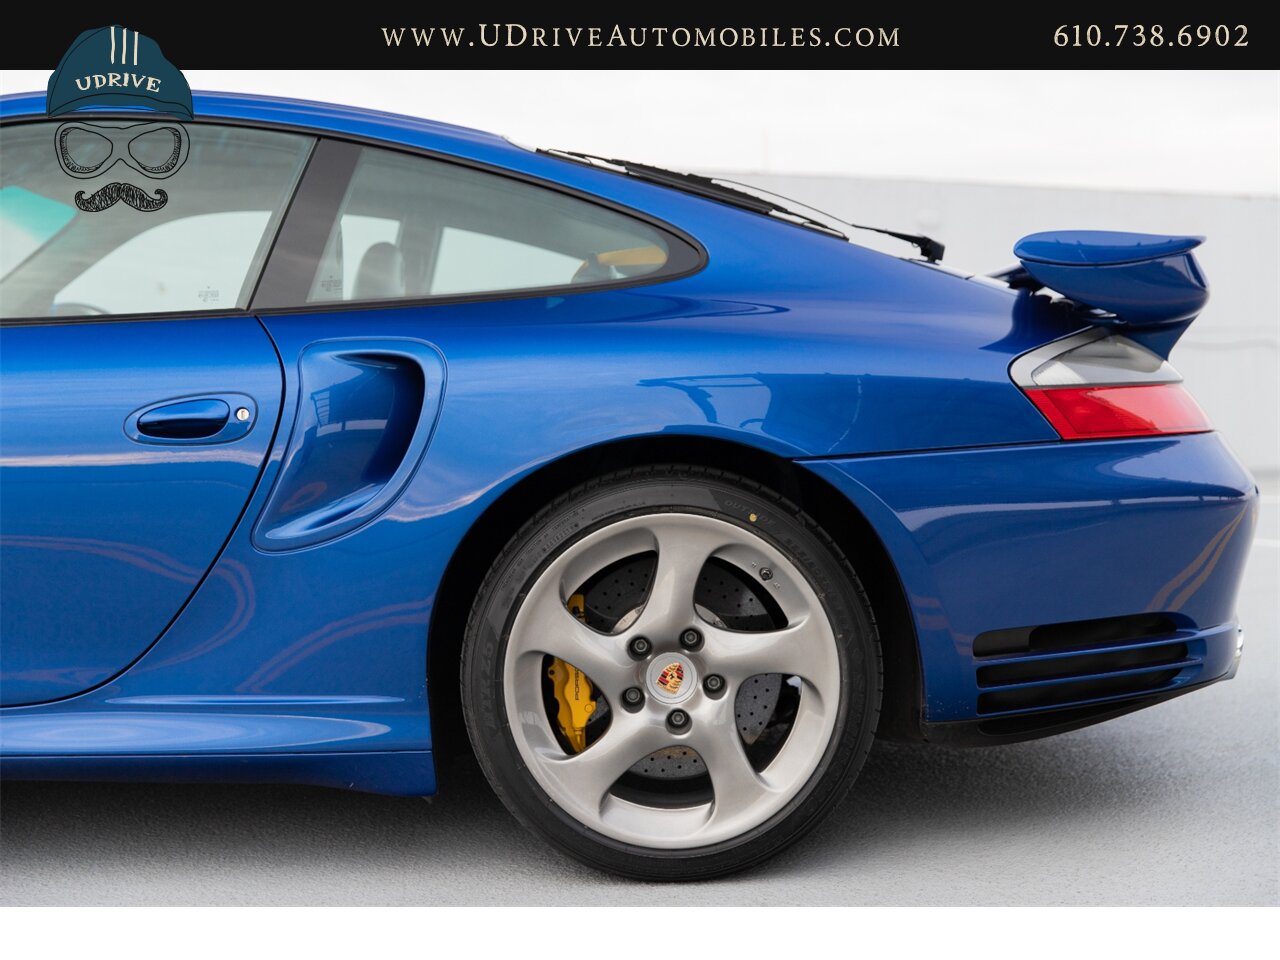 2005 Porsche 911 Turbo S Factory Aerokit Extremely Rare Cobalt Blue  Yellow Deviating Stitching 1 of a Kind Spec $160k MSRP - Photo 27 - West Chester, PA 19382